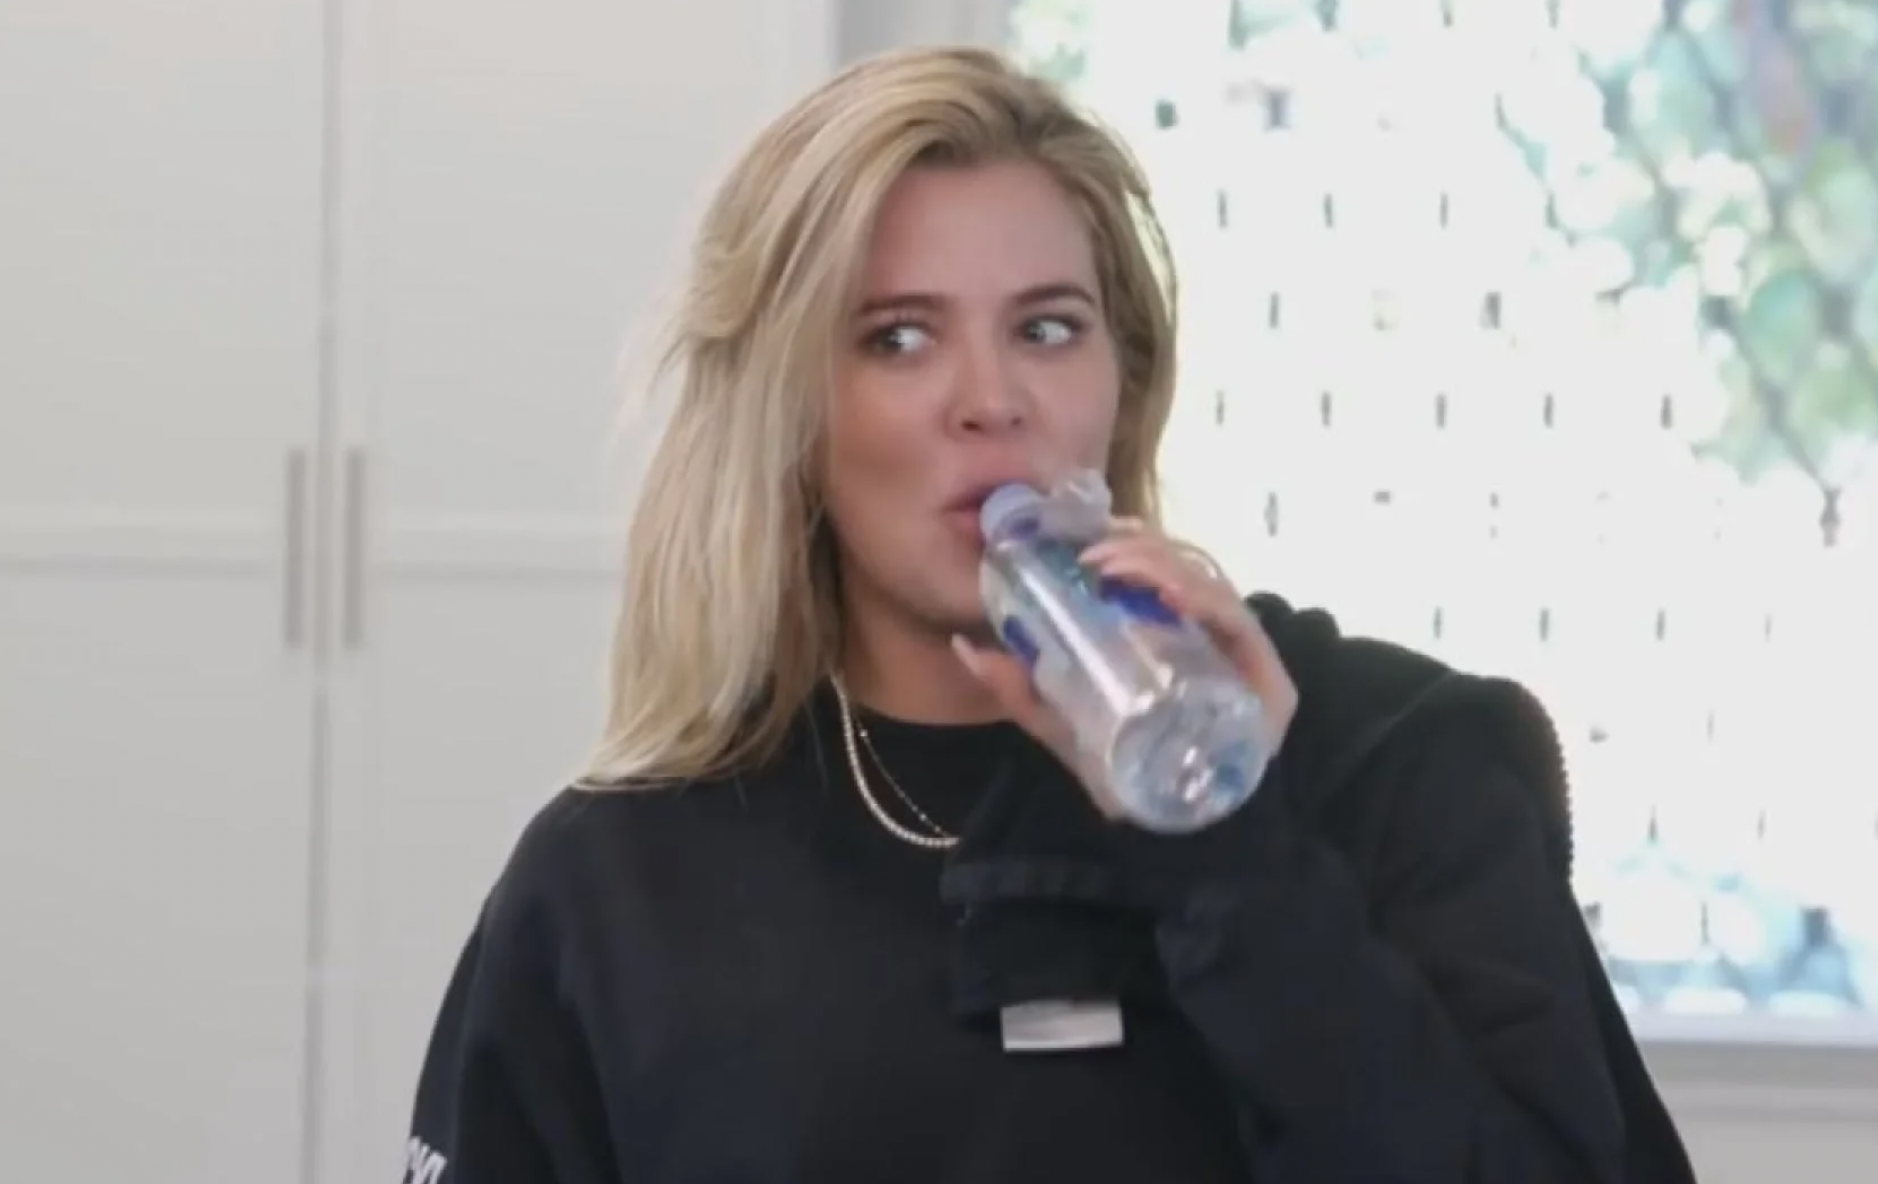 A screenshot of Khloe Kardashian sipping from a water bottle and giving someone an incredulous side-eye